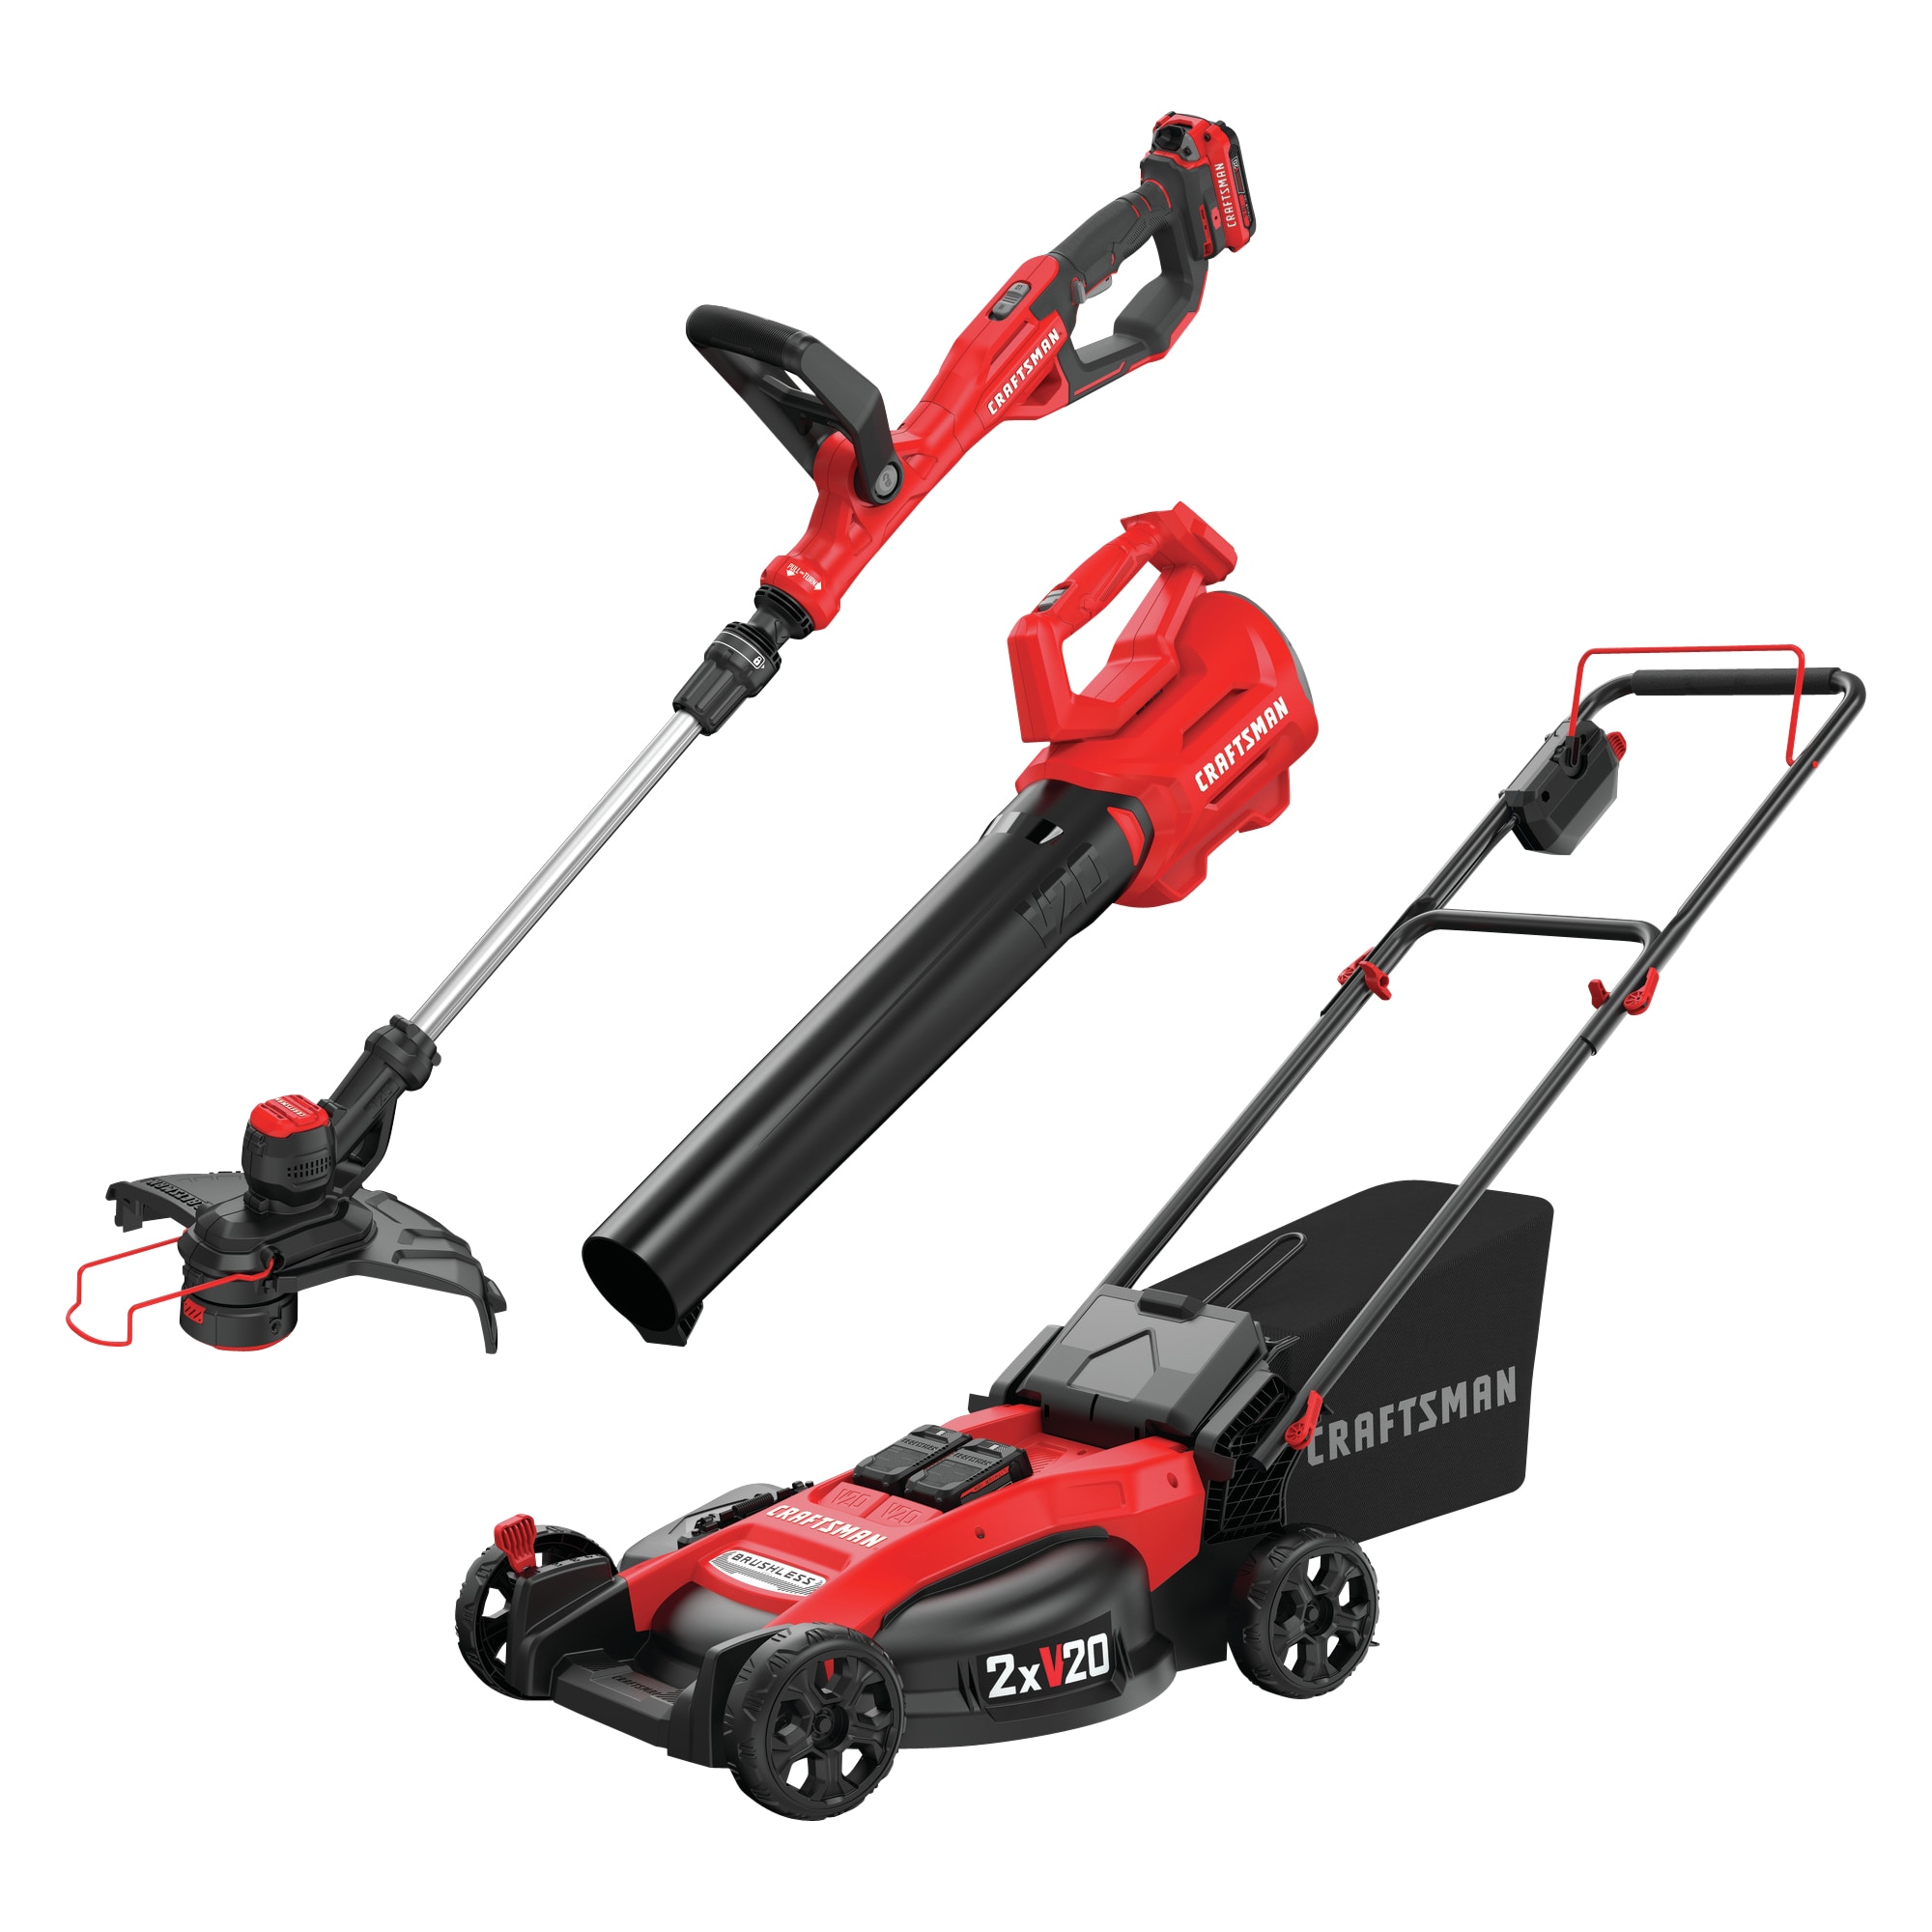 CRAFTSMAN V20 2-Piece 20-volt Max Cordless Power Equipment Combo Kit & 20V 20-Volt Max Brushless 20-in Push Cordless Electric Lawn Mower 5 Ah